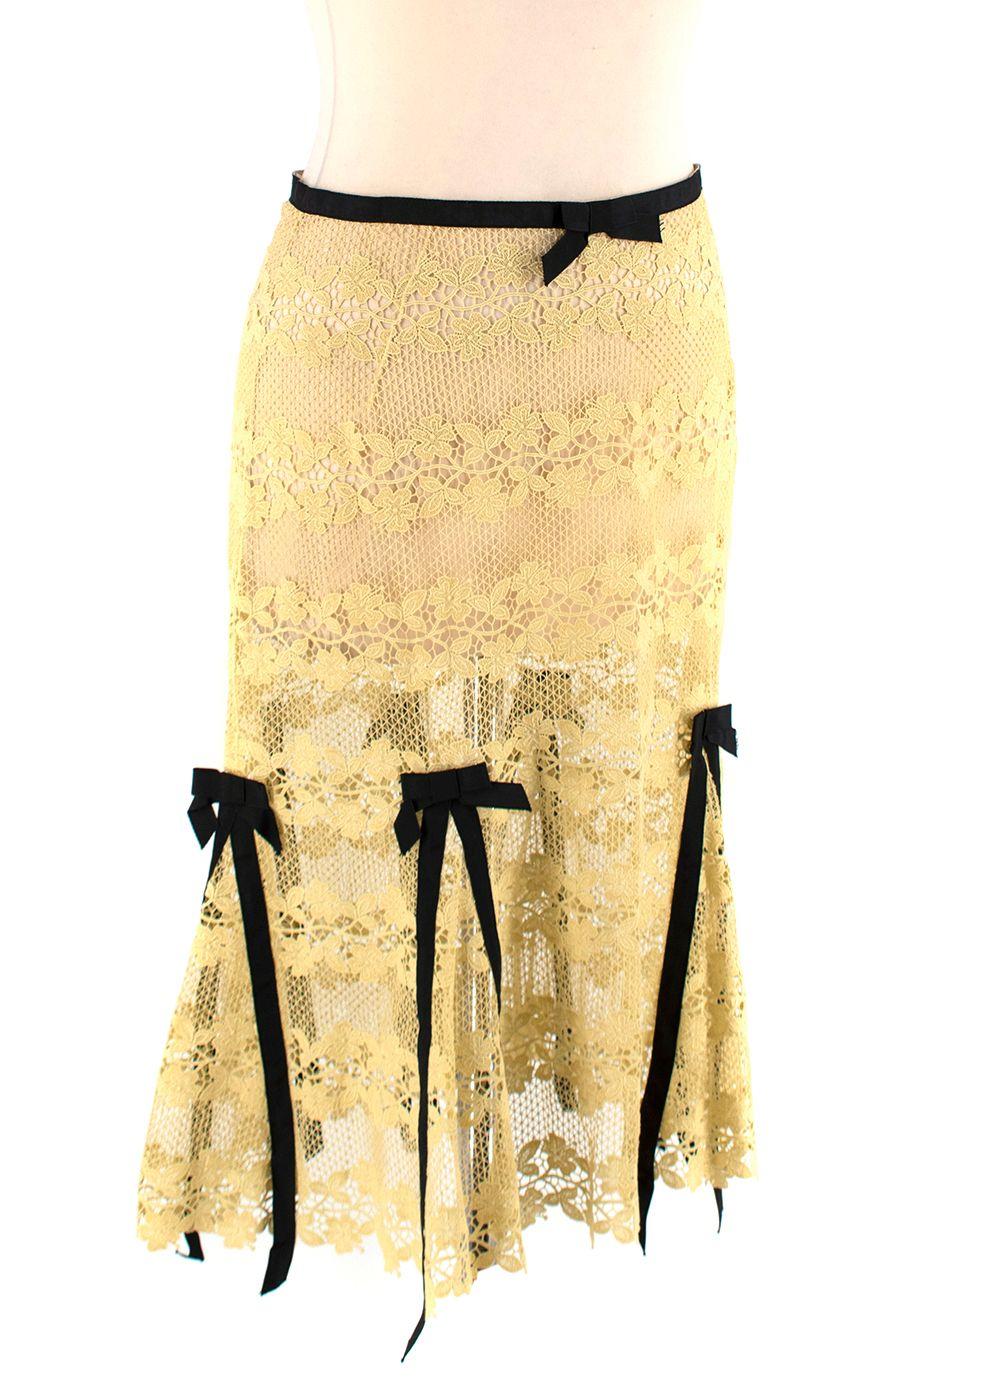 Louis Vuitton Sheer Yellow Lace Bow-Trimmed Skirt

- Sheer floral lace, mid-length skirt trimmed with black grosgrain bows, and tonal waistband
- Concealed back zip
- See-through, unlined 

Materials 
100% Cotton 

Made in France
Dry Clean Only